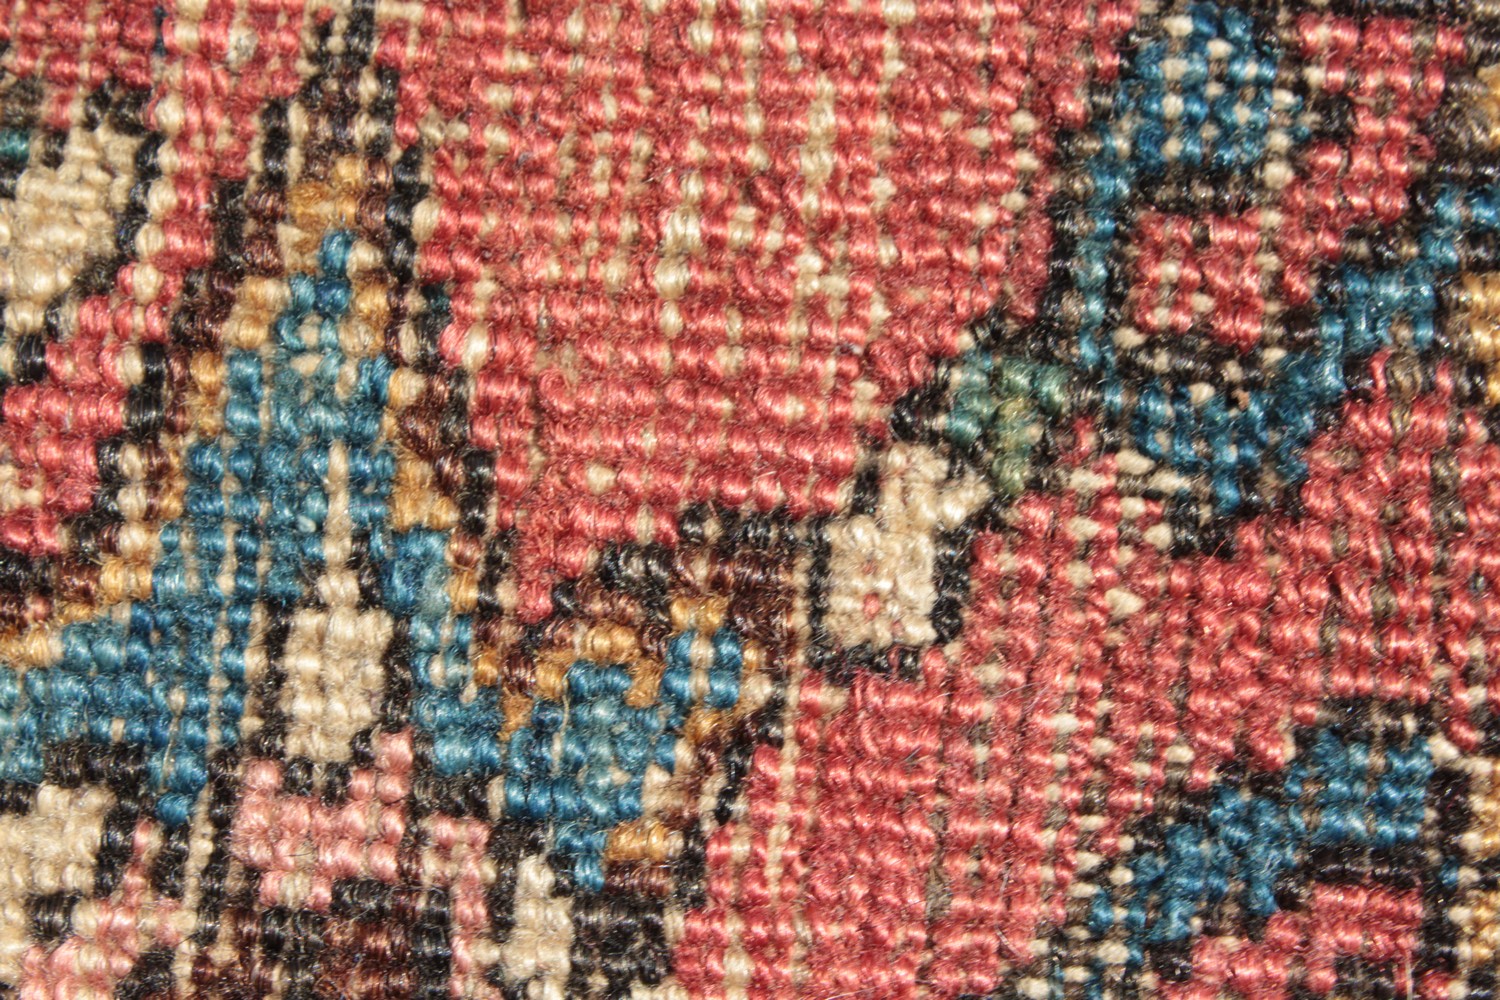 A FINE ANTIQUE SHAH ASHRAFI BAKHTIARI PERSIAN RUG with an allover patterb, central motif and smaller - Image 6 of 7